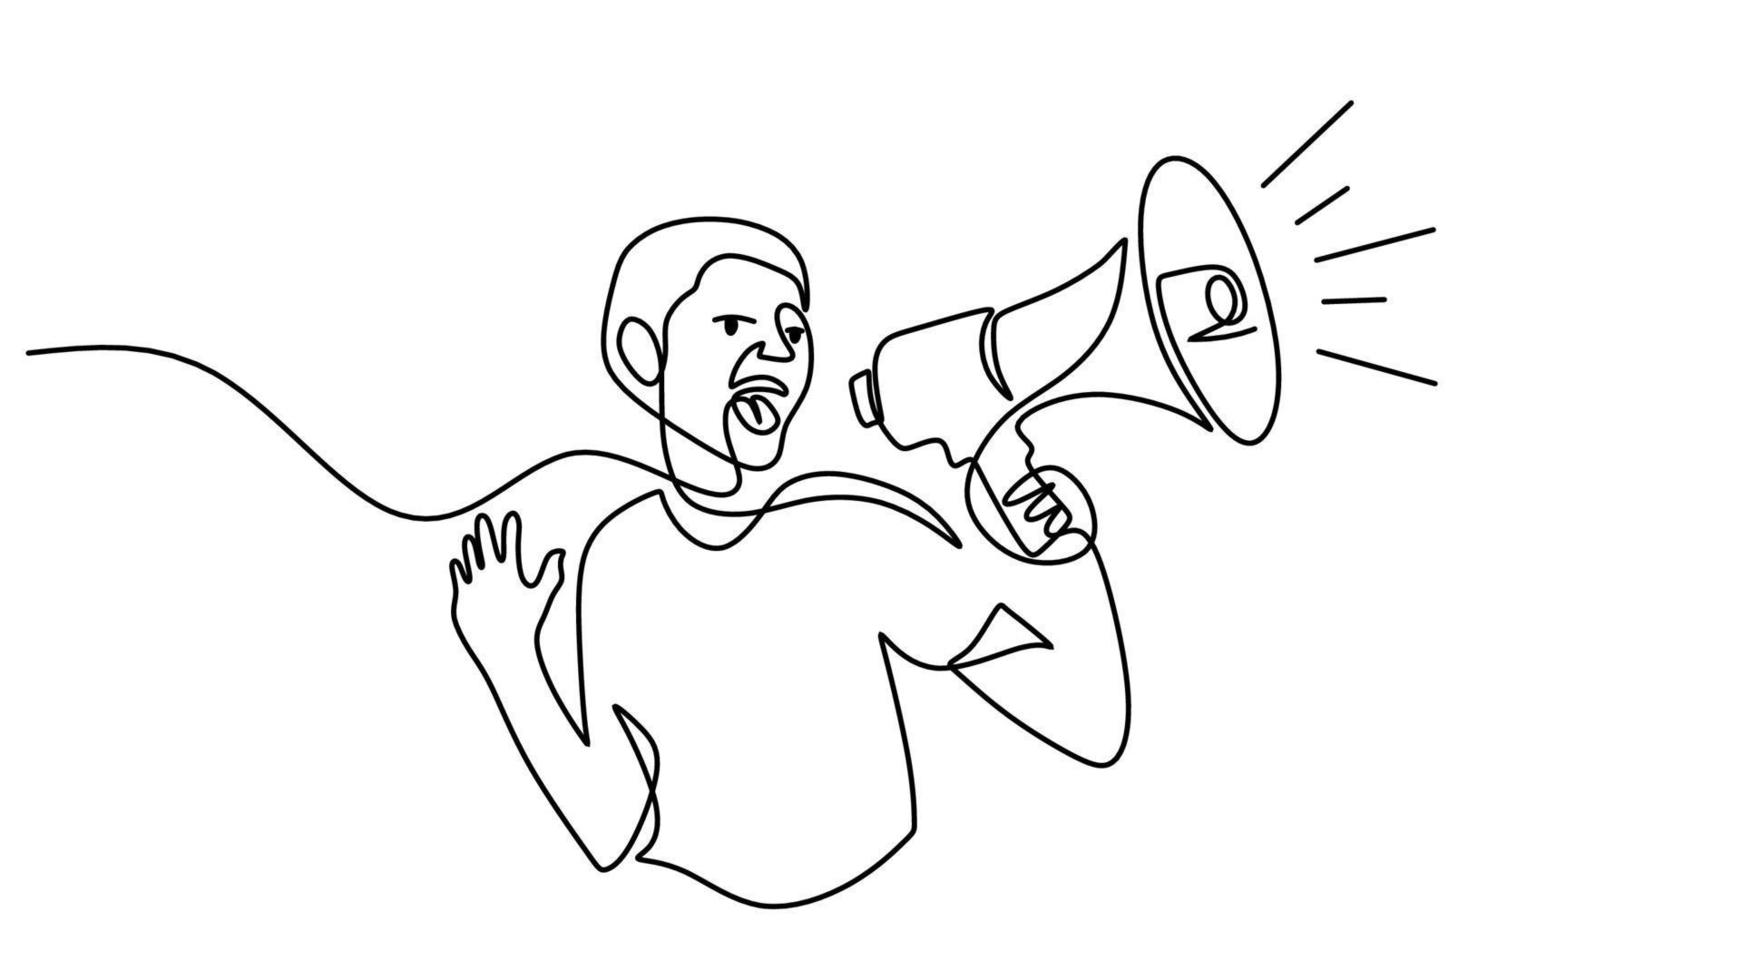 One line drawing of man hold megaphone horn on white background vector